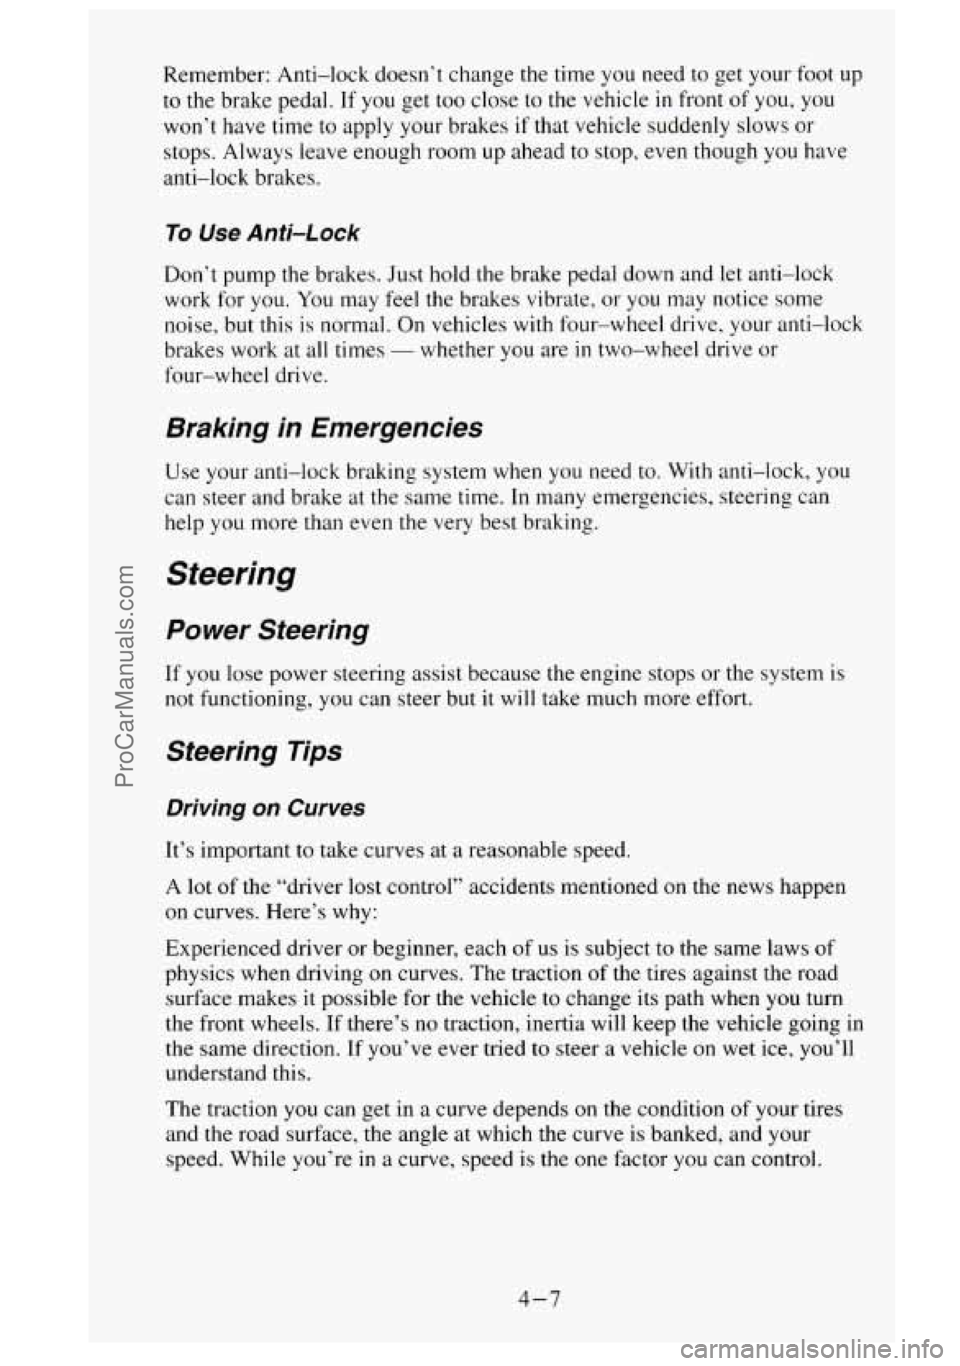 GMC SIERRA 1995  Owners Manual Remember: Anti-lock doesn’t  change  the time  you need  to get your  foot up 
to  the  brake pedal.  If  you get  too  close  to  the vehicle in front  of you,  you 
won’t  have  time 
to apply y